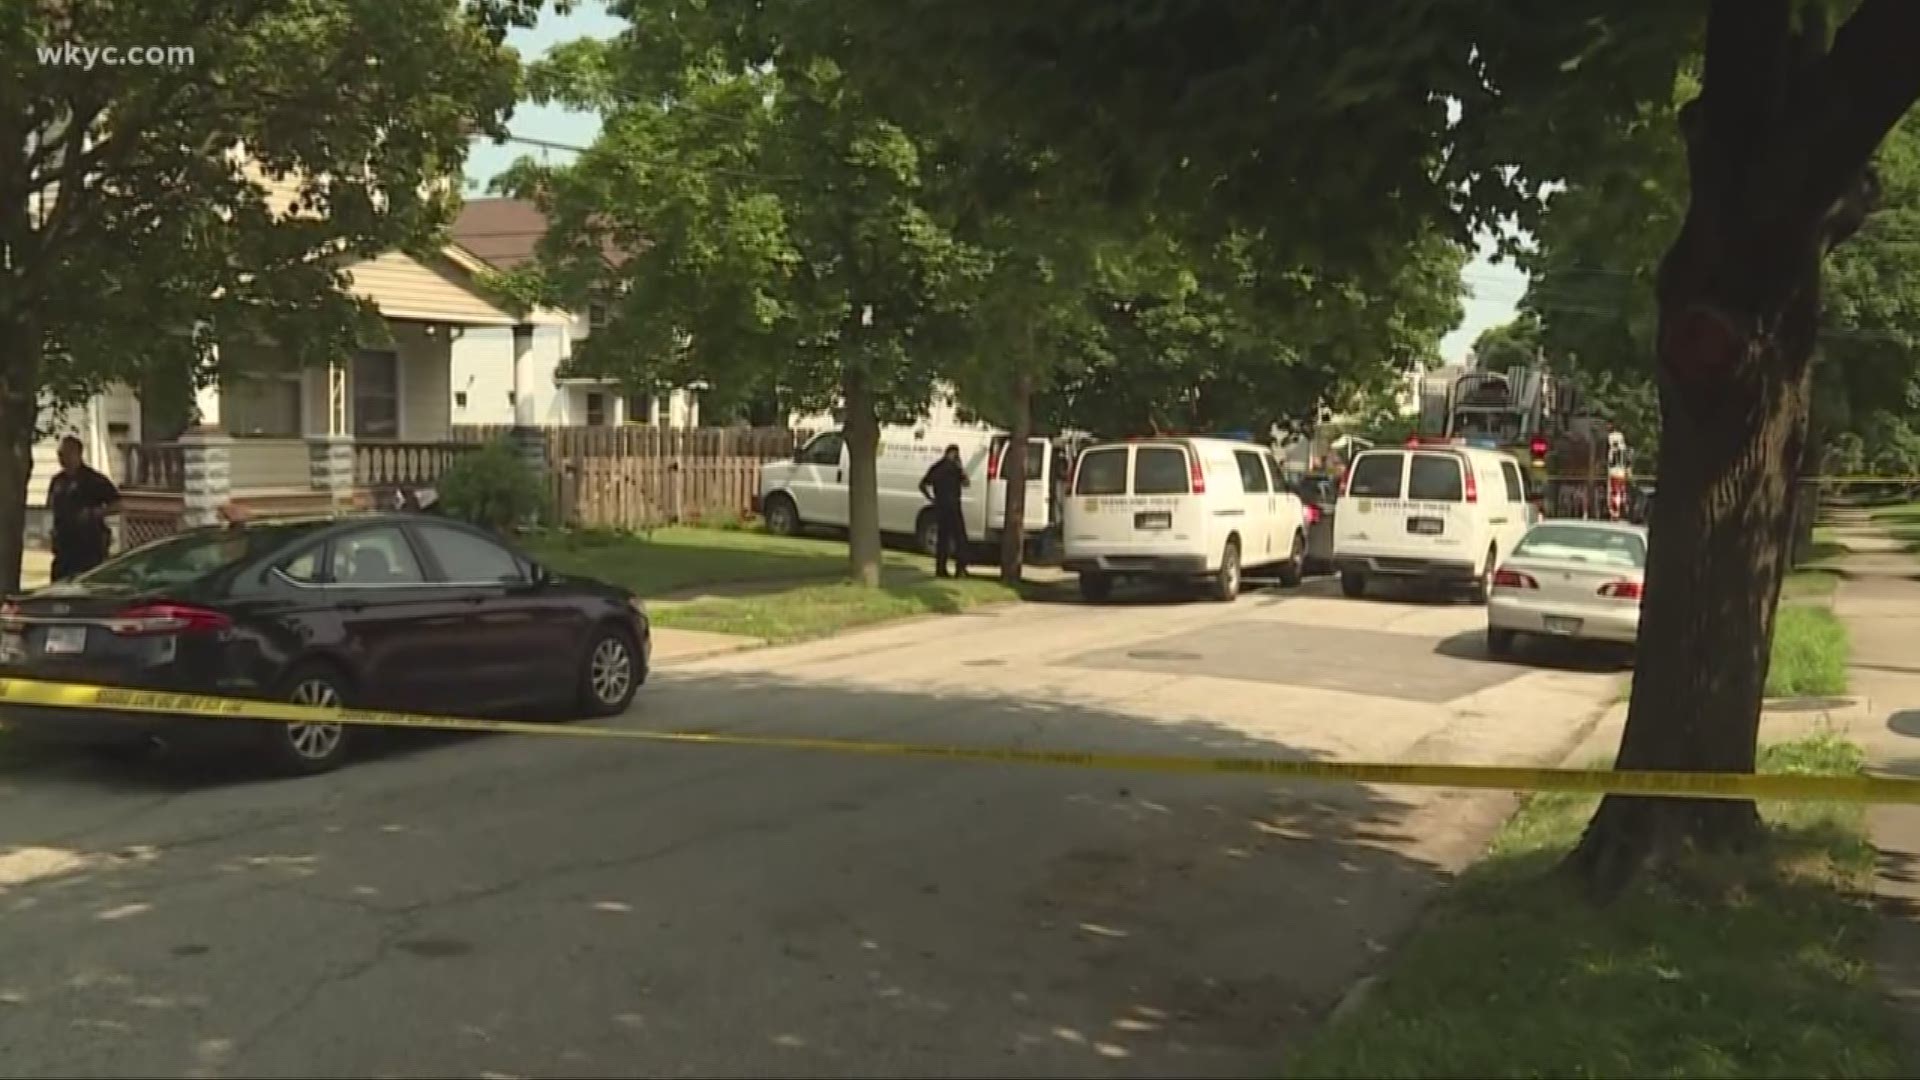 Police Chief Calvin D. Williams confirmed four people are dead following an incident in Cleveland's Slavic Village neighborhood Tuesday morning.